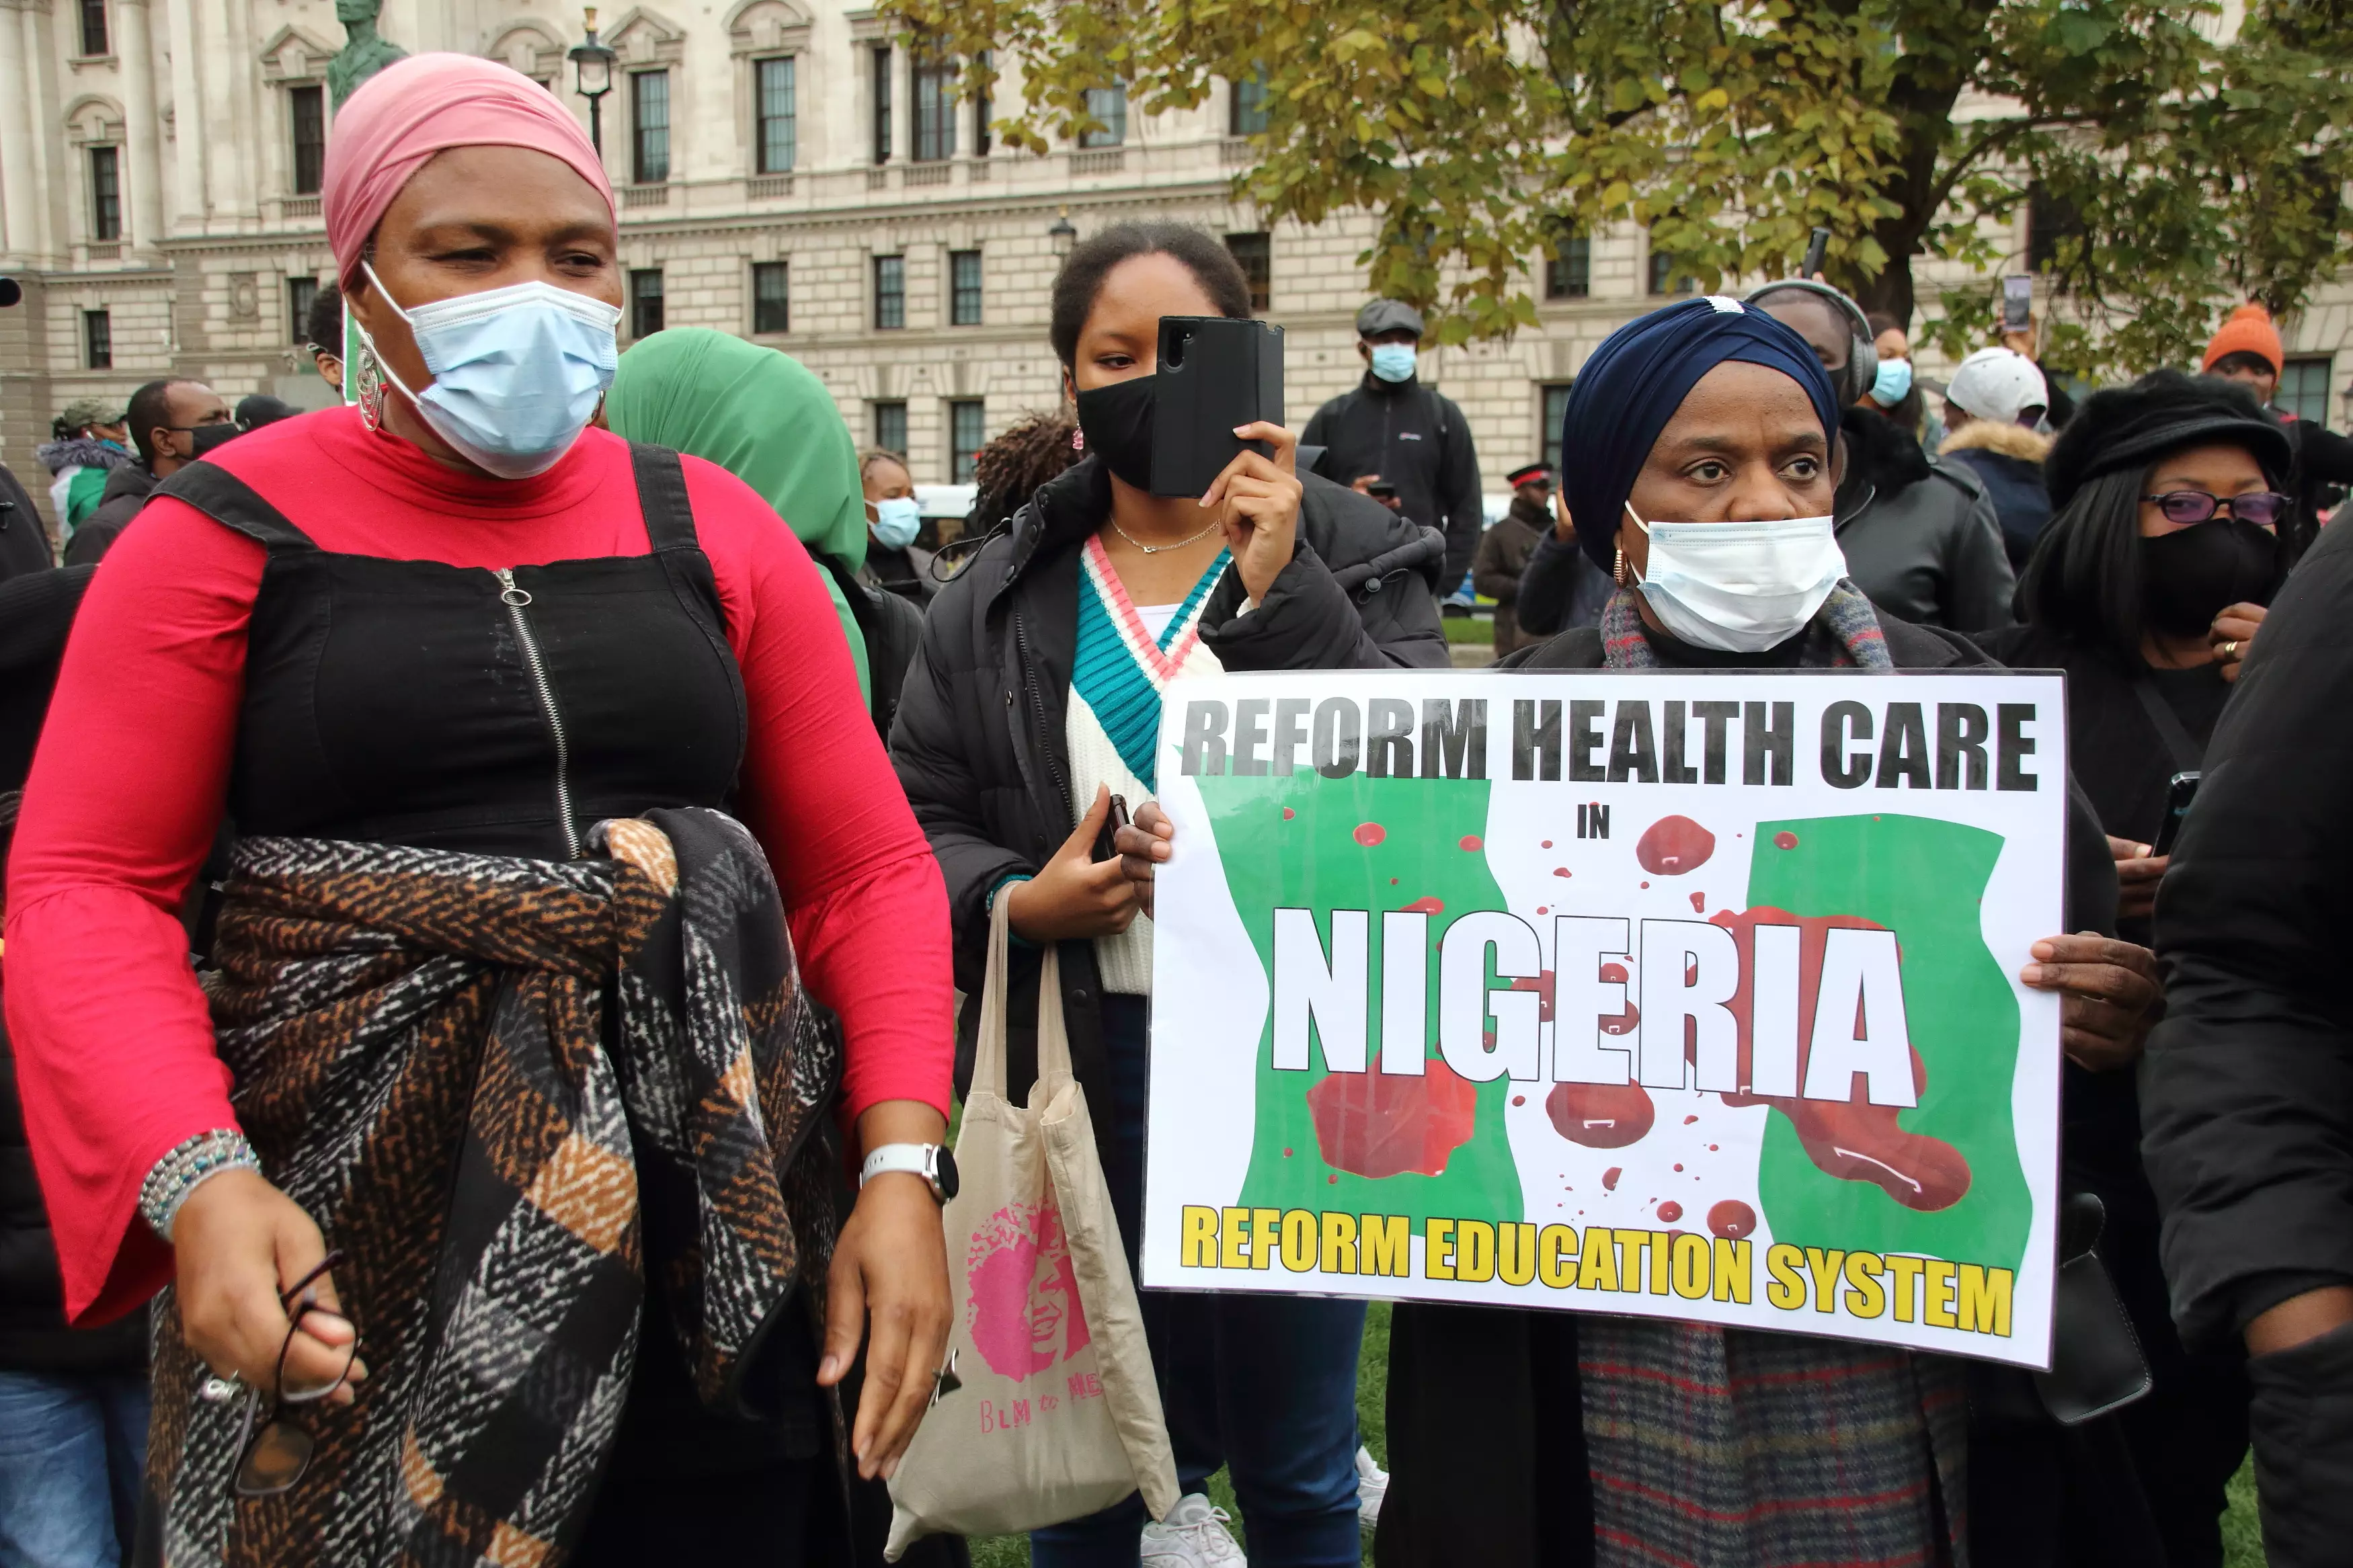 Campaigners have long called for reform of health care and police in Nigeria.